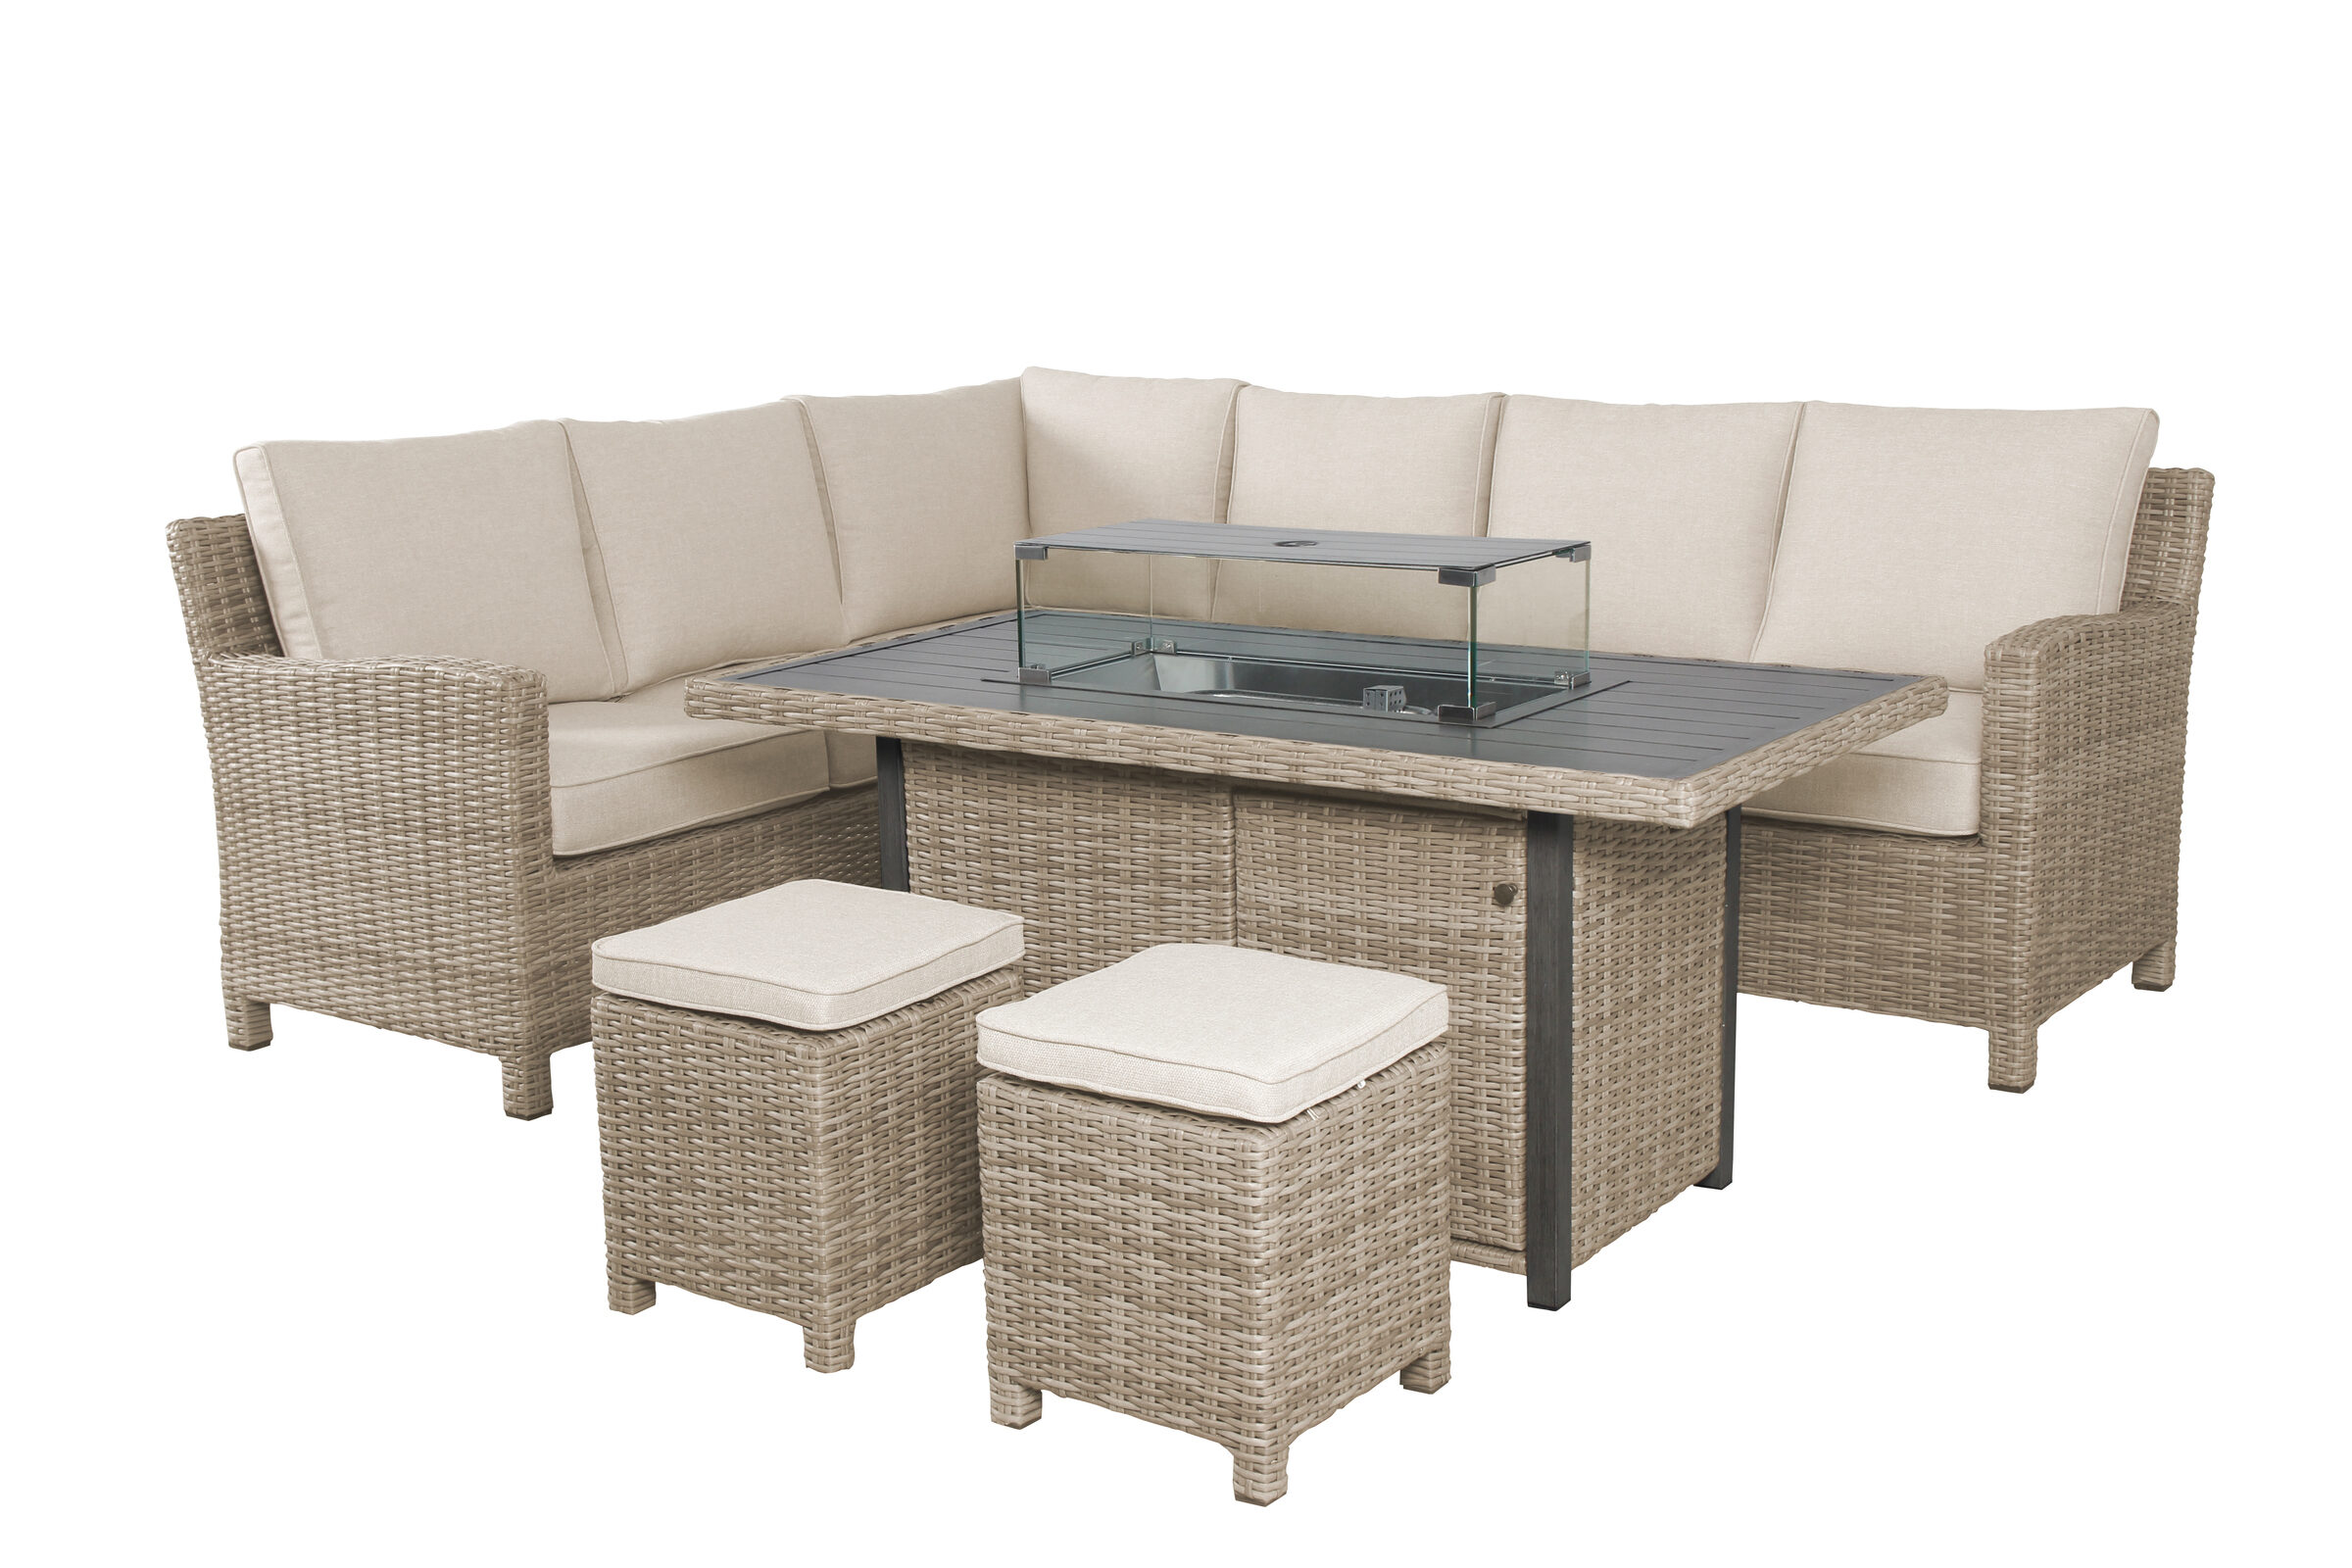 Palma Rh Corner With Firepit Table Oyster 1